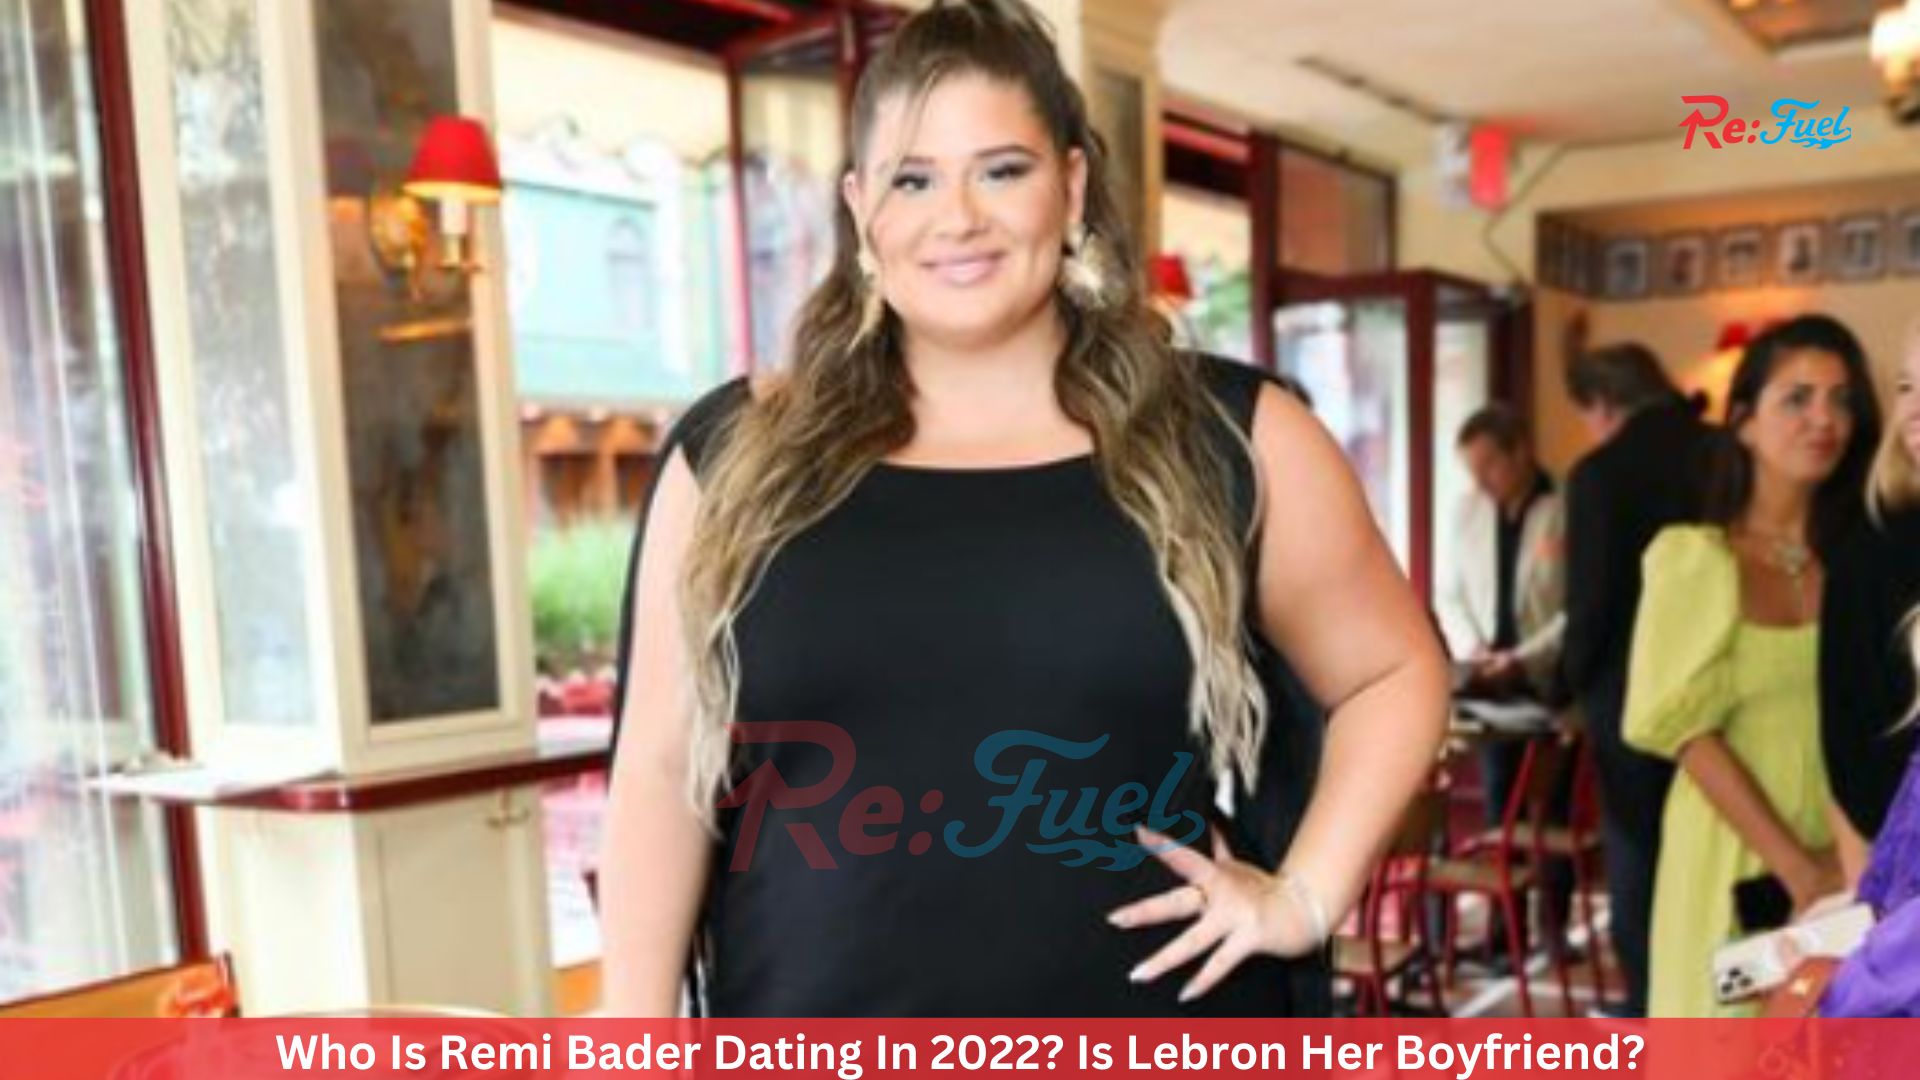 Who Is Remi Bader Dating In 2022? Is Lebron Her Boyfriend?